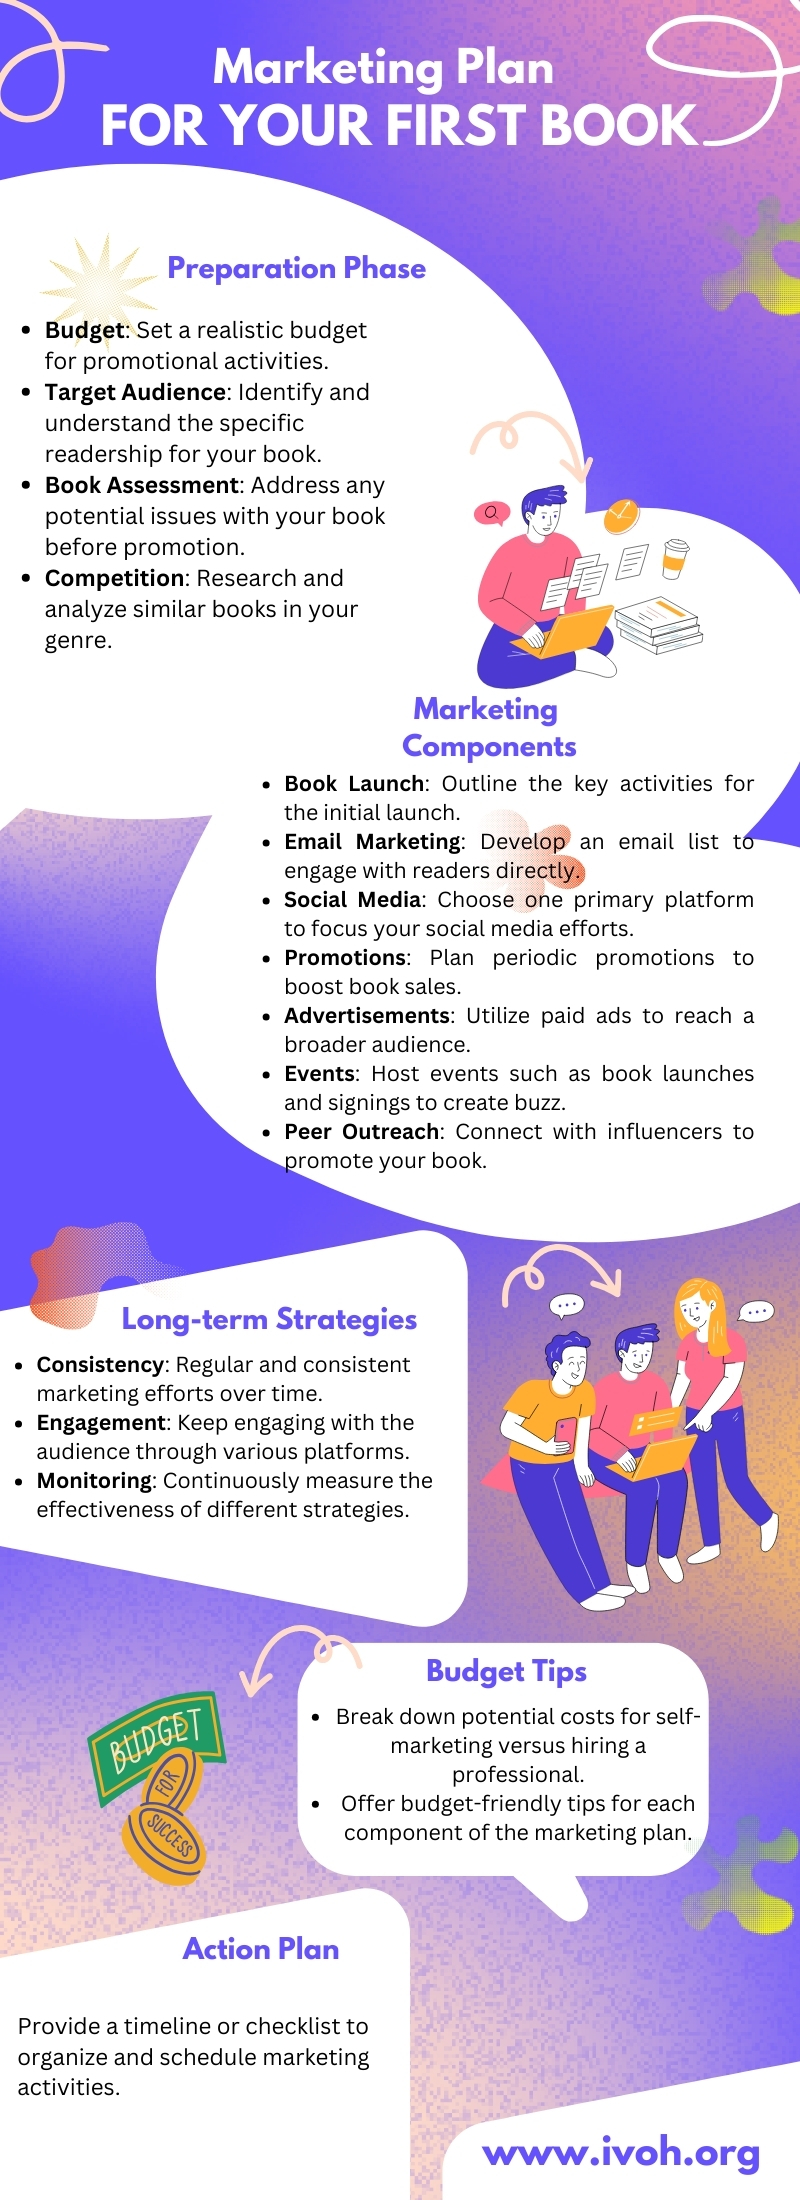 marketing plan for your first book infographic